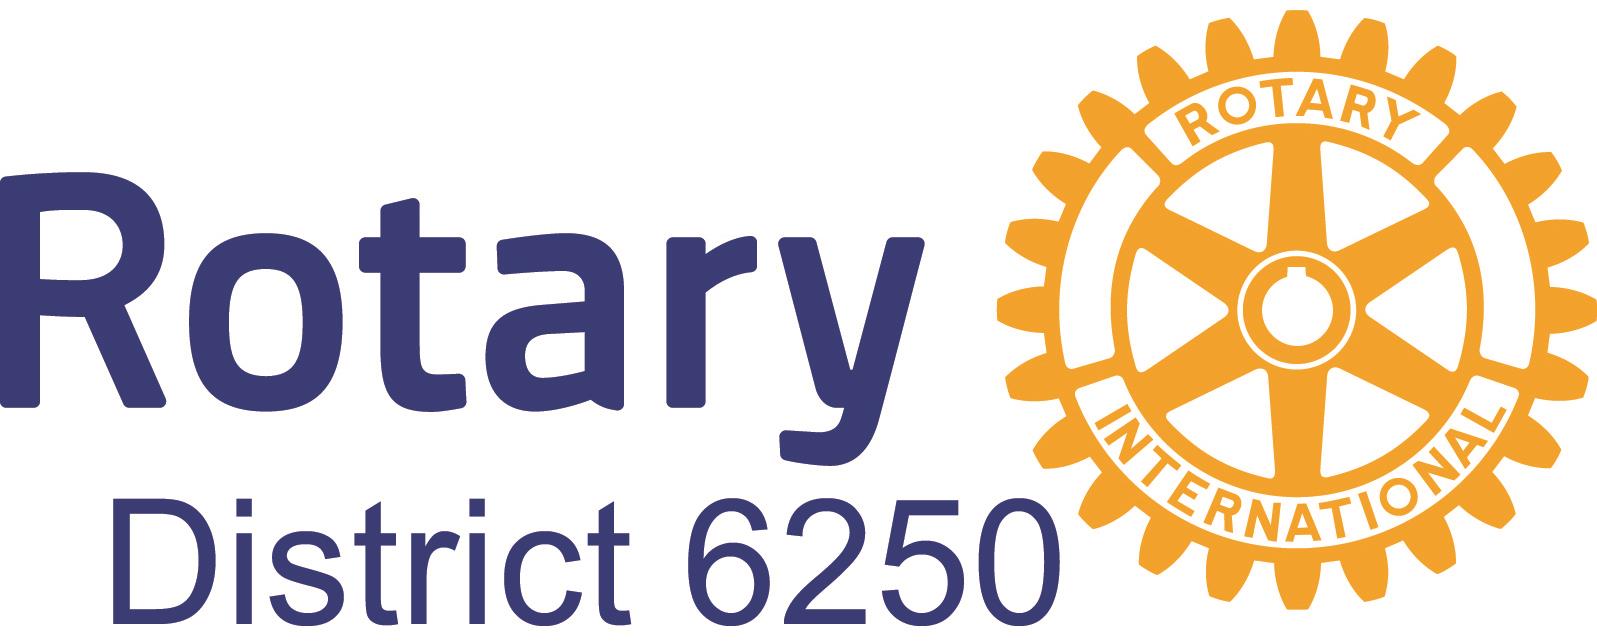 Rotary District 6250